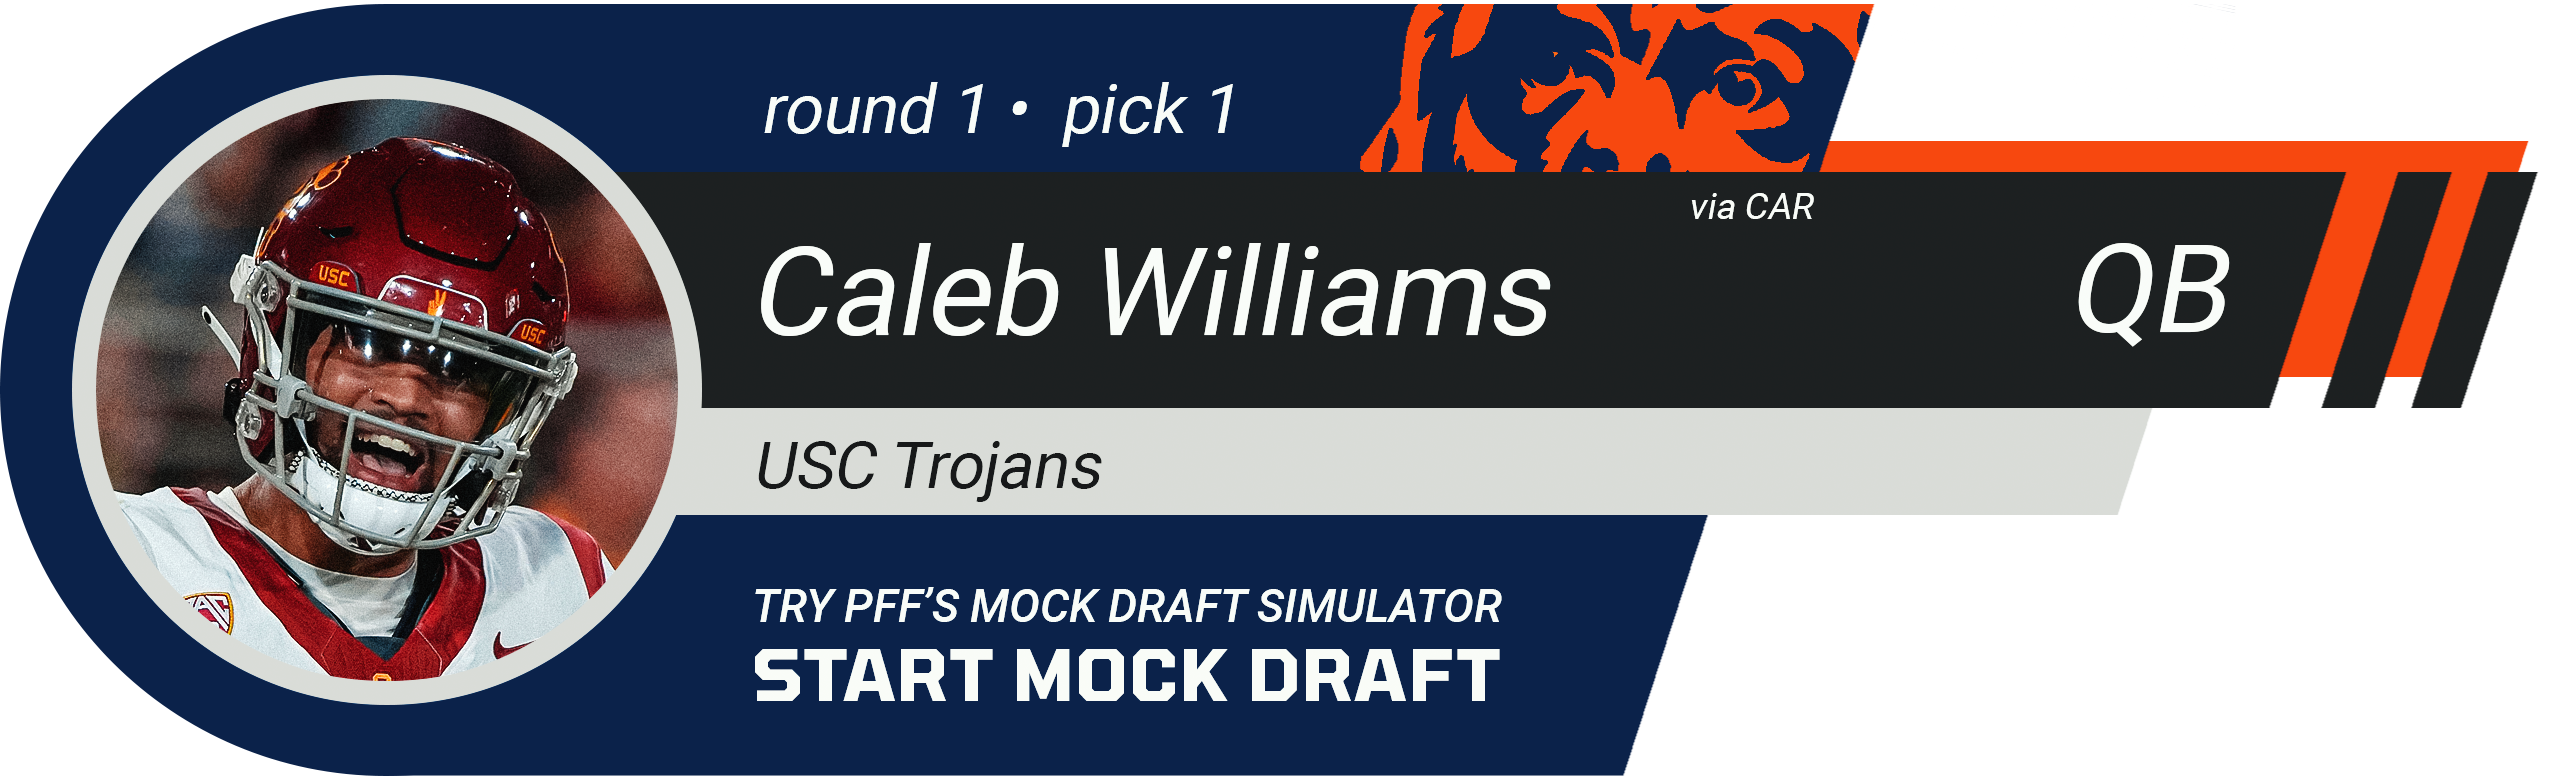 1. Chicago Bears (from Panthers): Caleb Williams, QB, USC